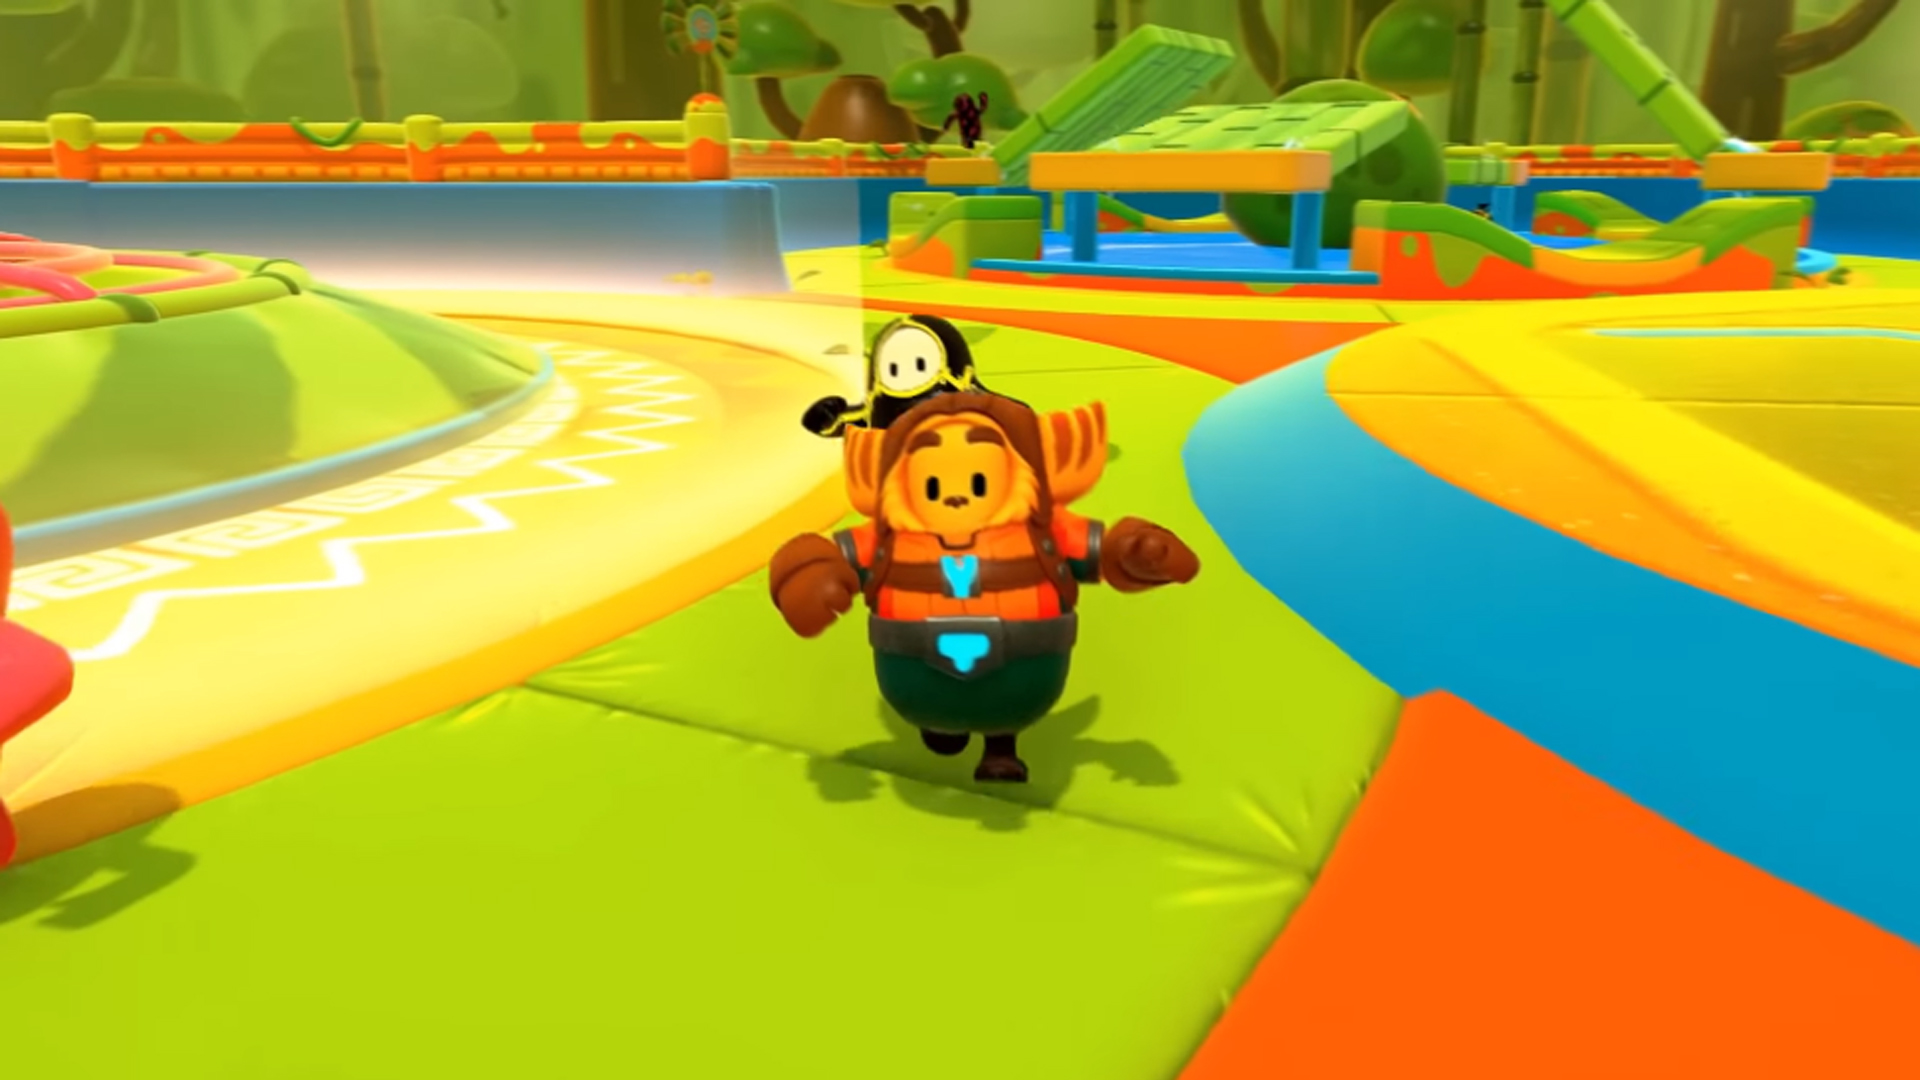 Can I Play Stumble Guys on Xbox, PS5, and PS4? - GameRevolution